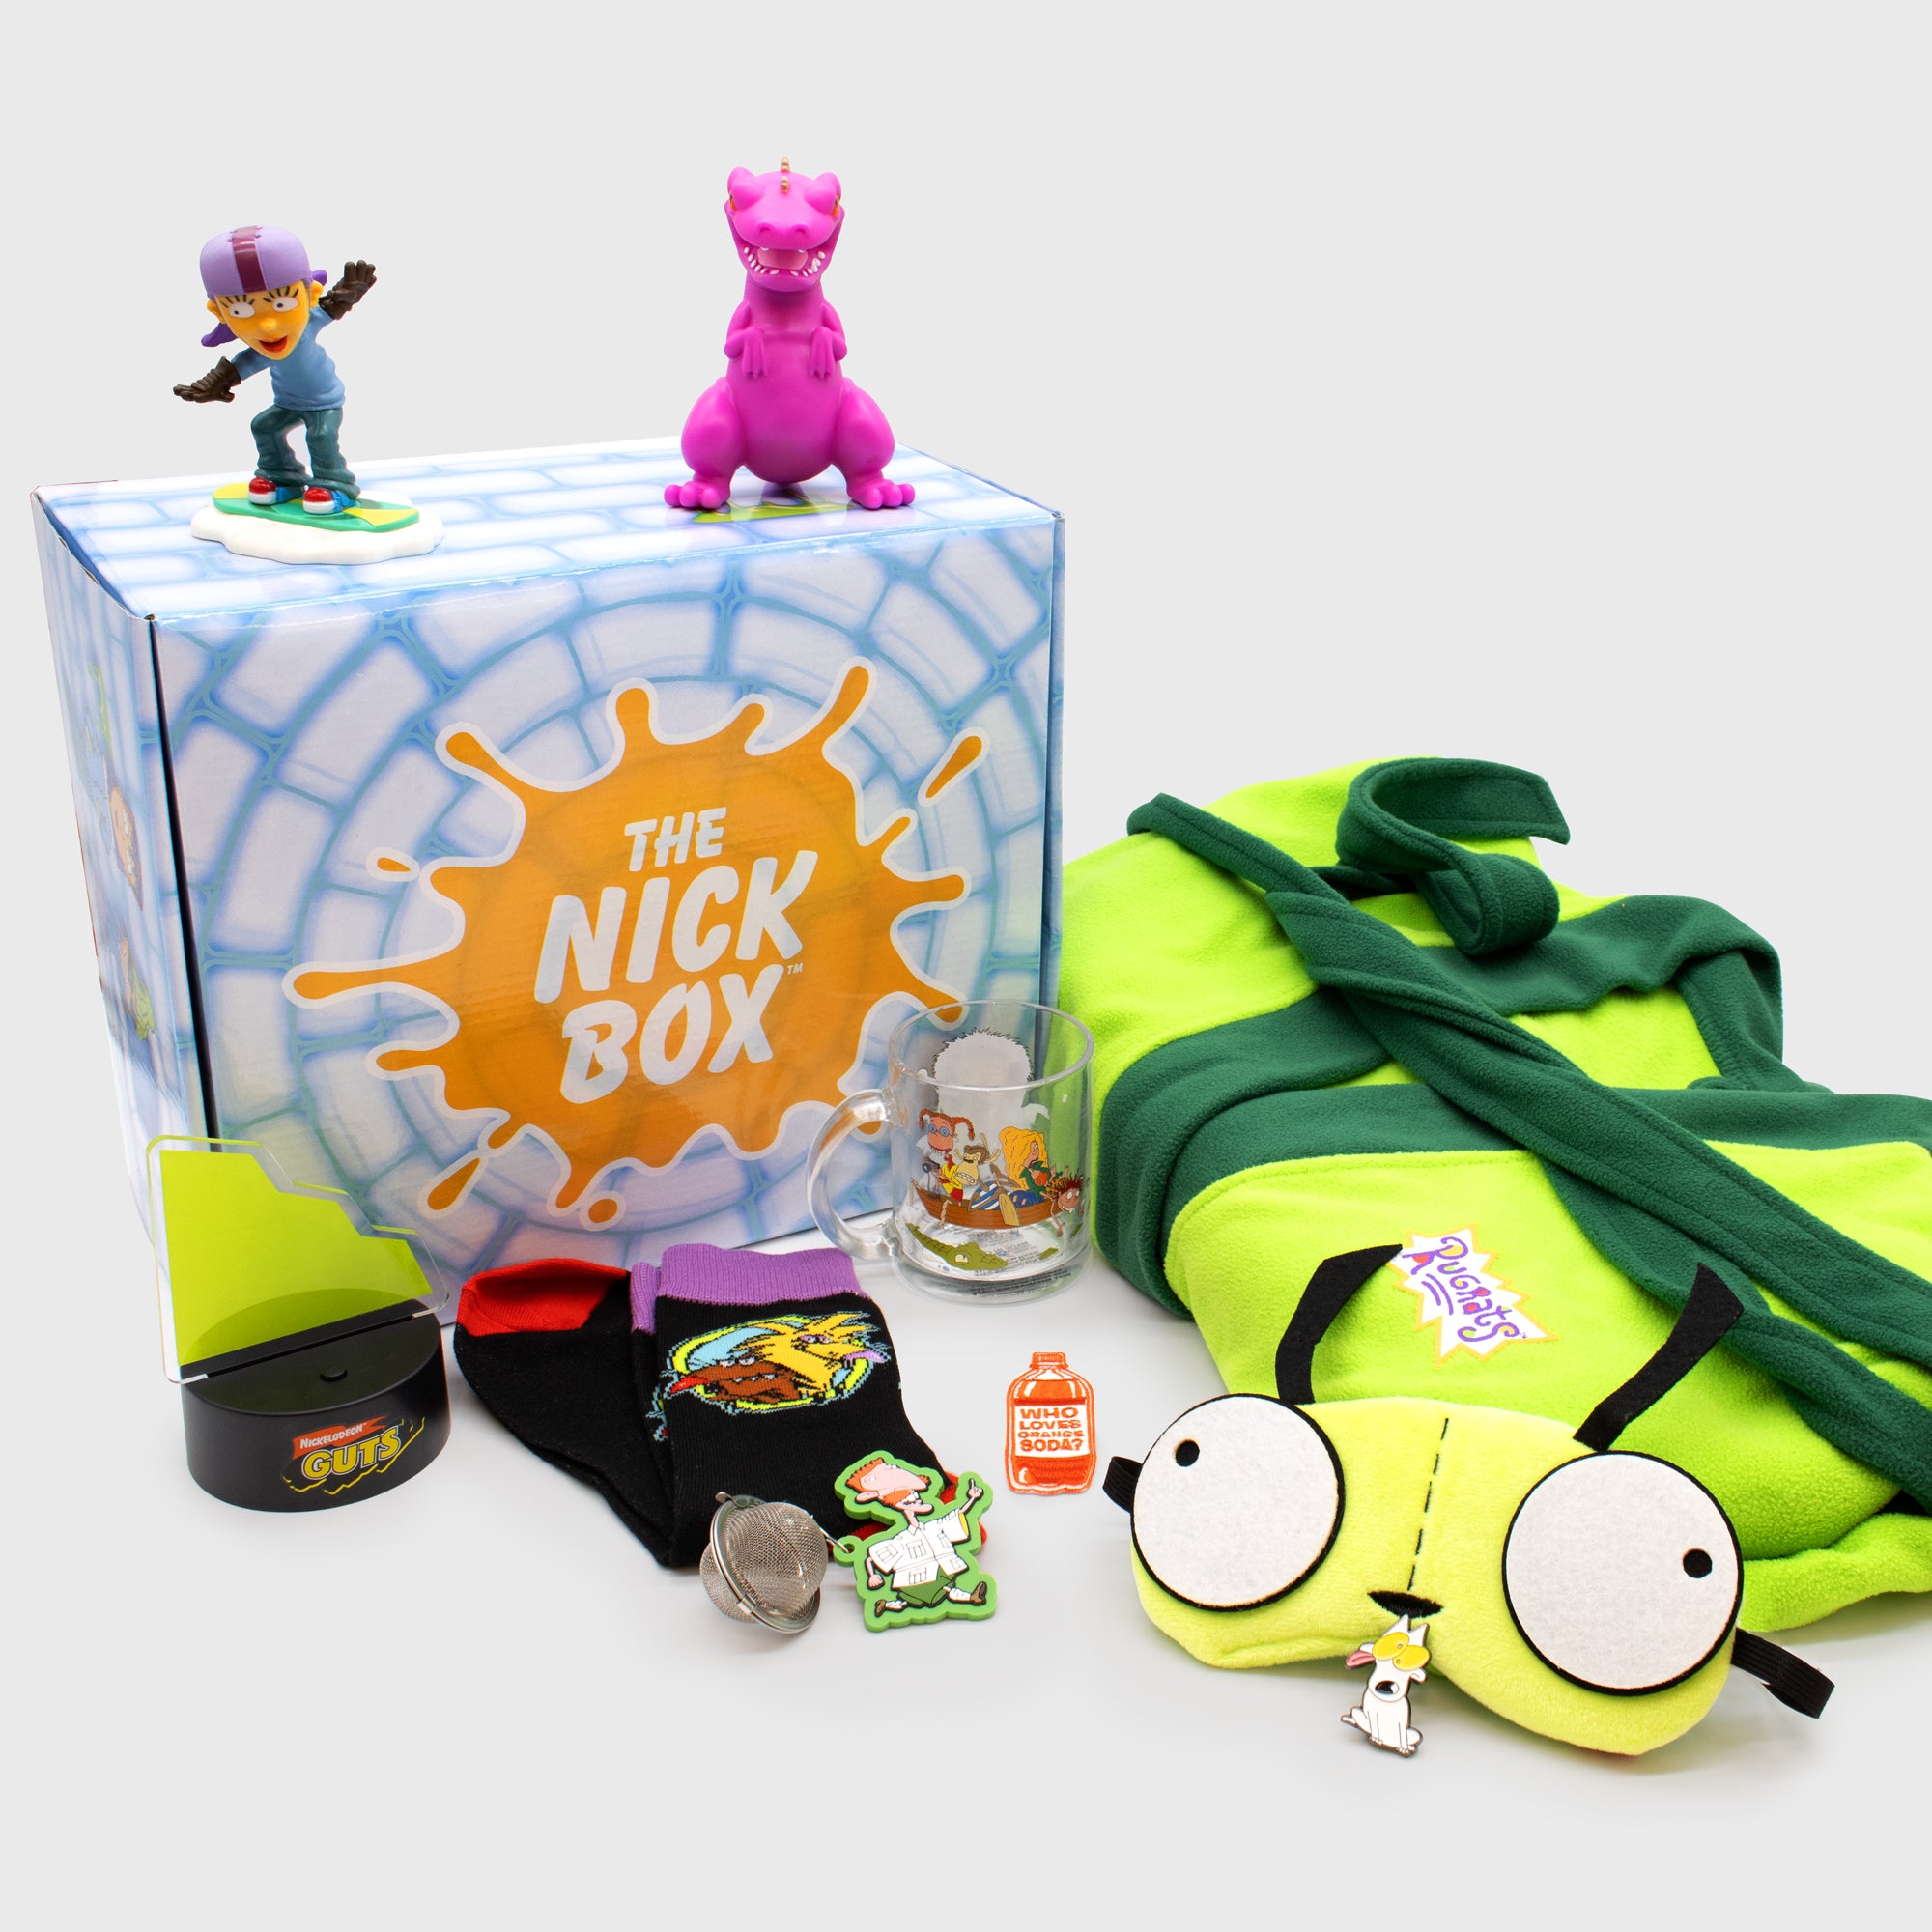 The Nick Box CultureFly